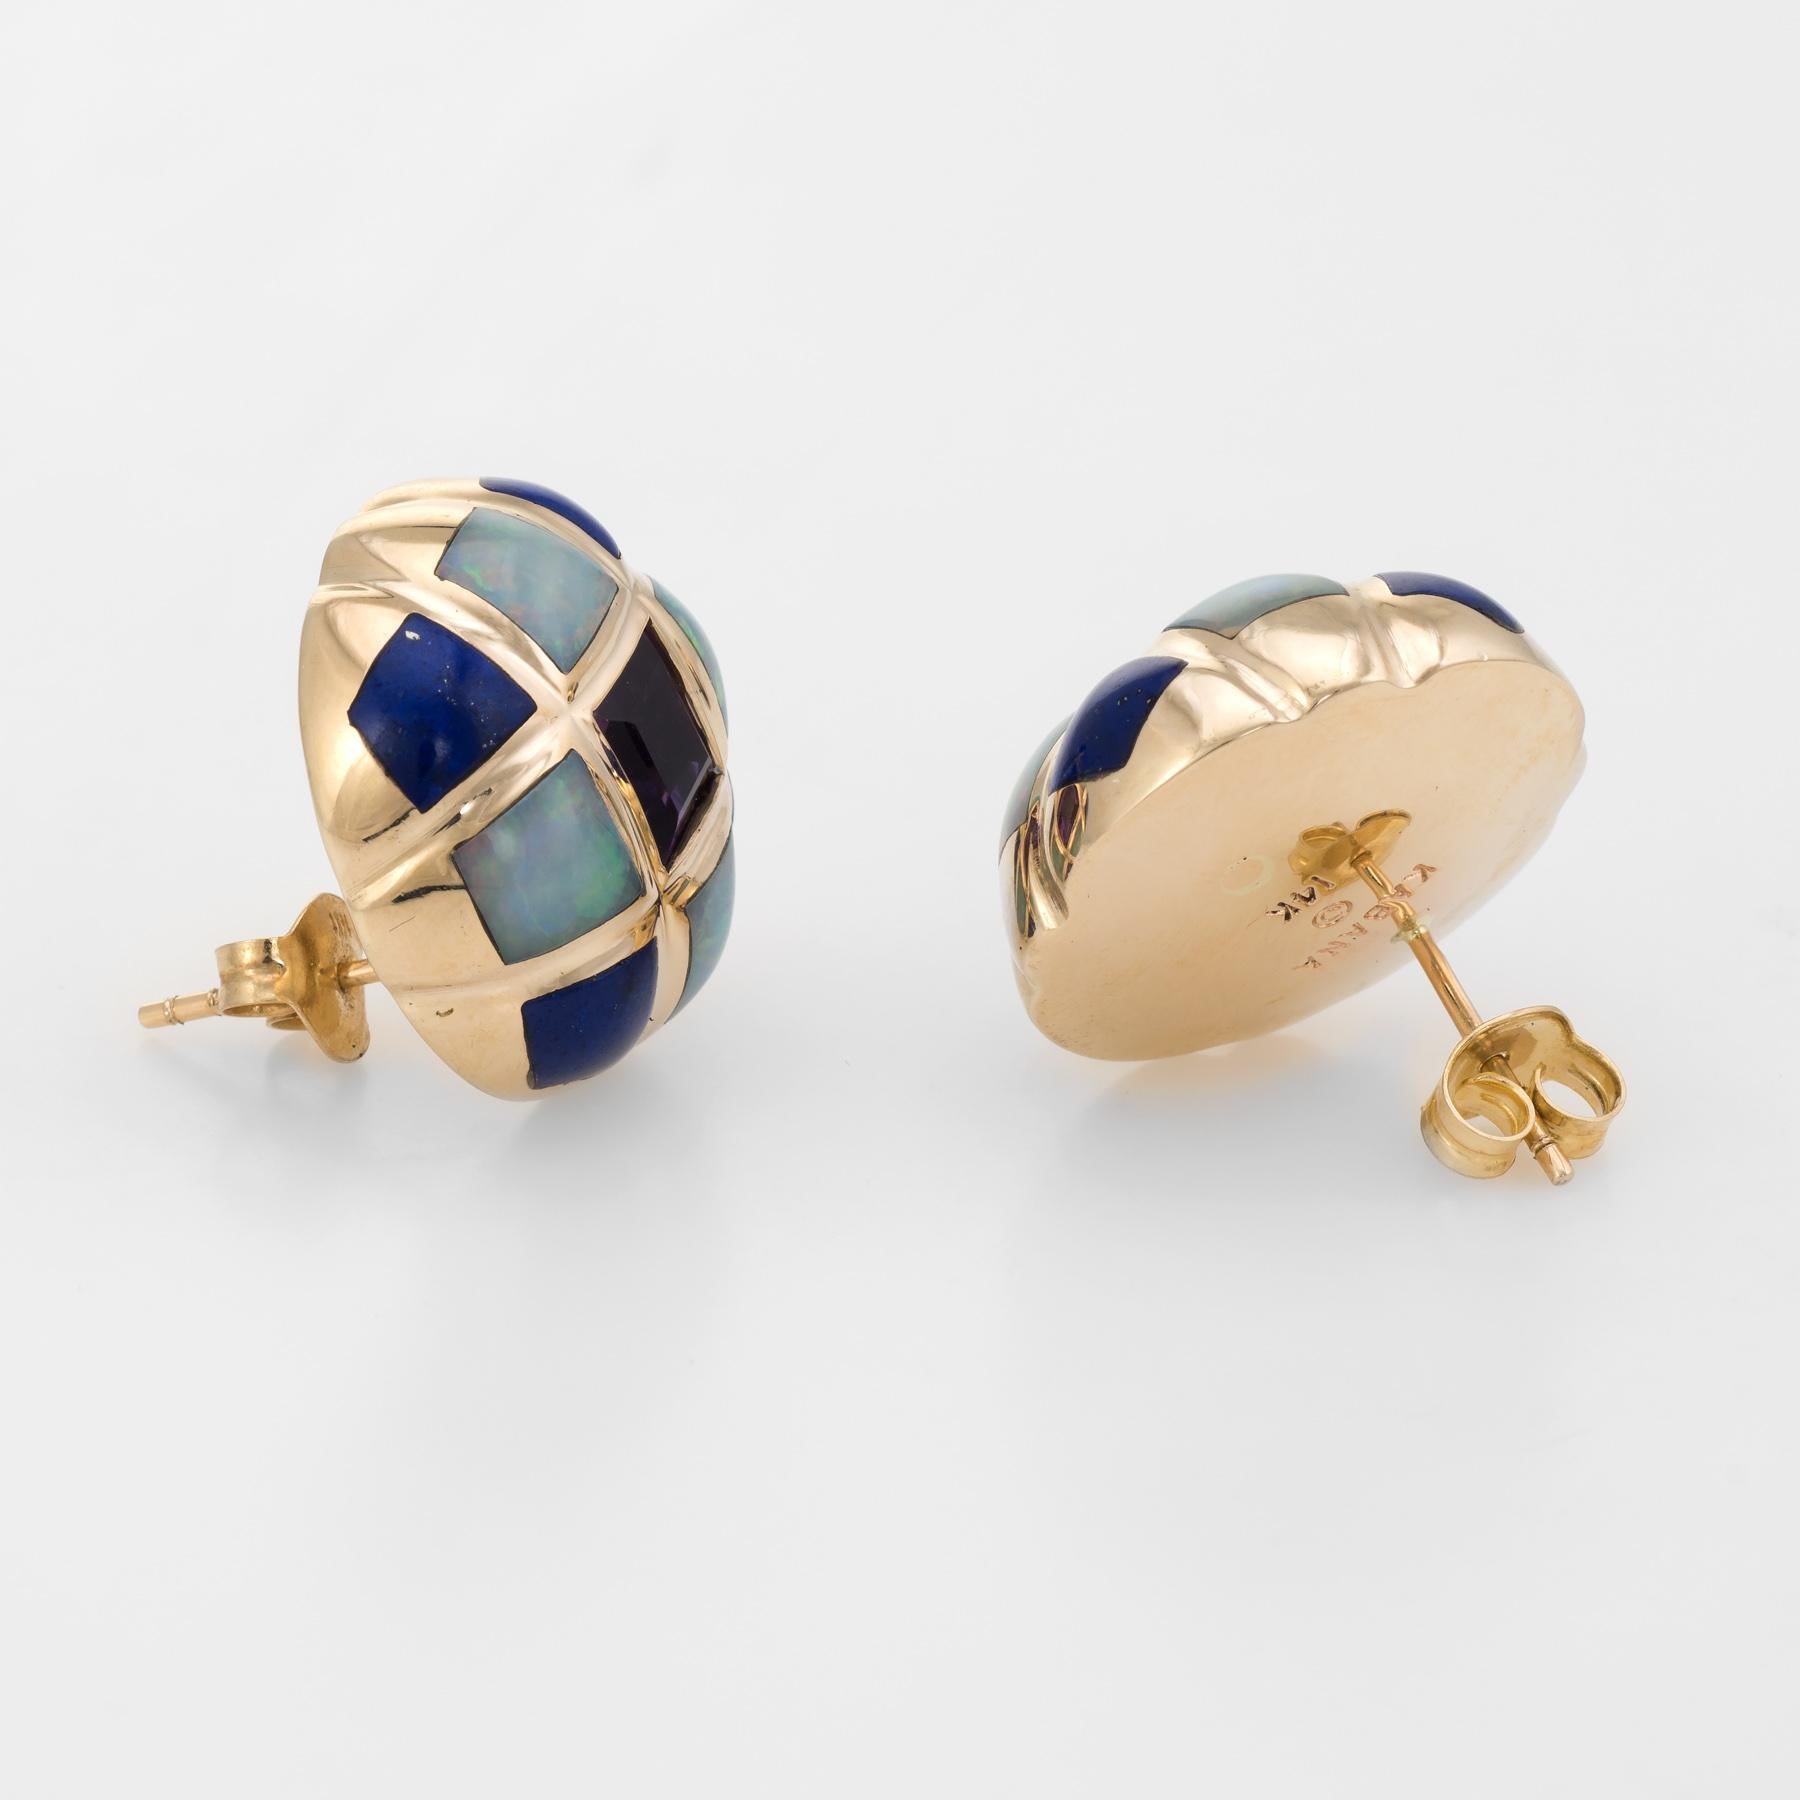 Stylish pair of Kabana earrings set with inlaid mixed gemstones, crafted in 14k yellow gold. 

Centrally mounted amethyst measures 5.5mm (estimated at 0.75 carats each - 1.50 carats total estimated weight), accented with lapis lazuli measuring